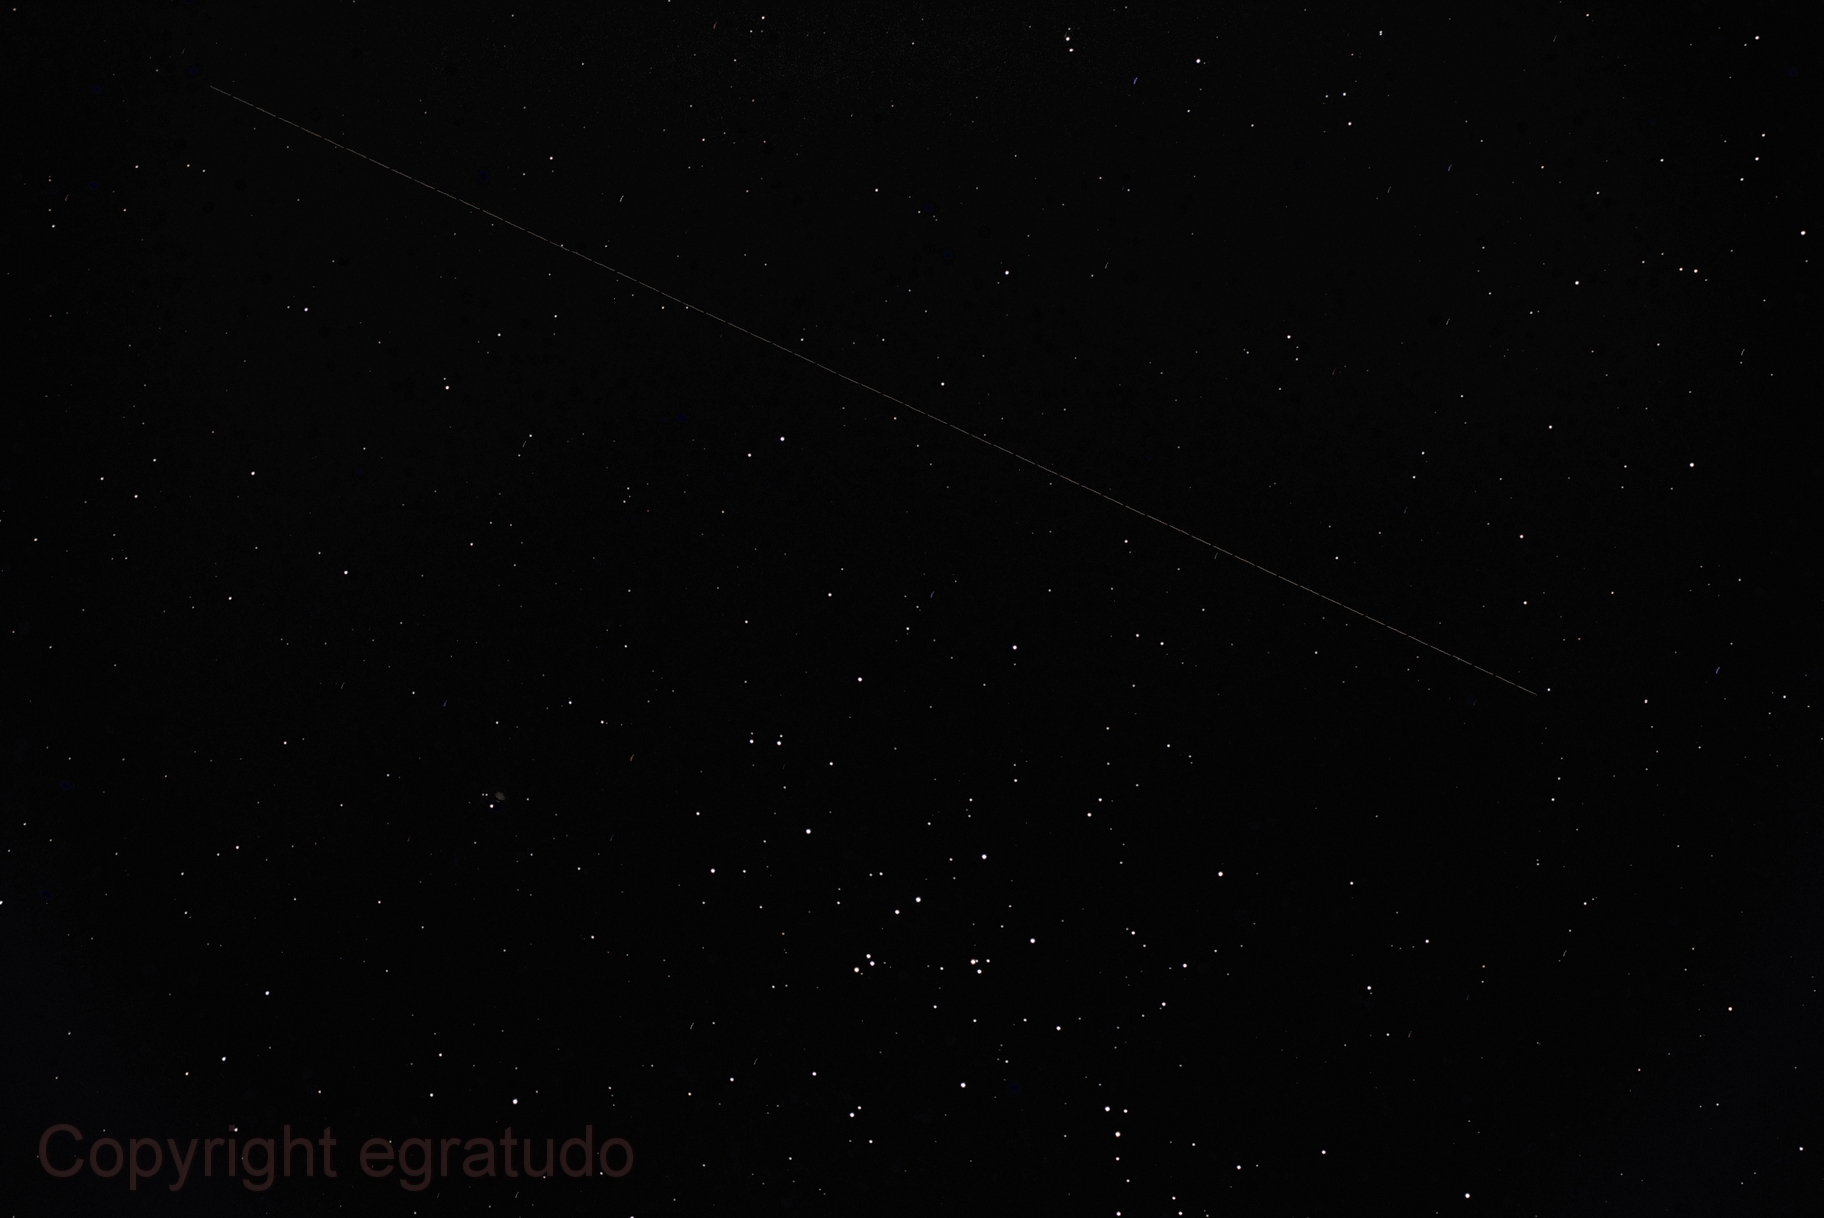 Asteroid BL86 passing M44